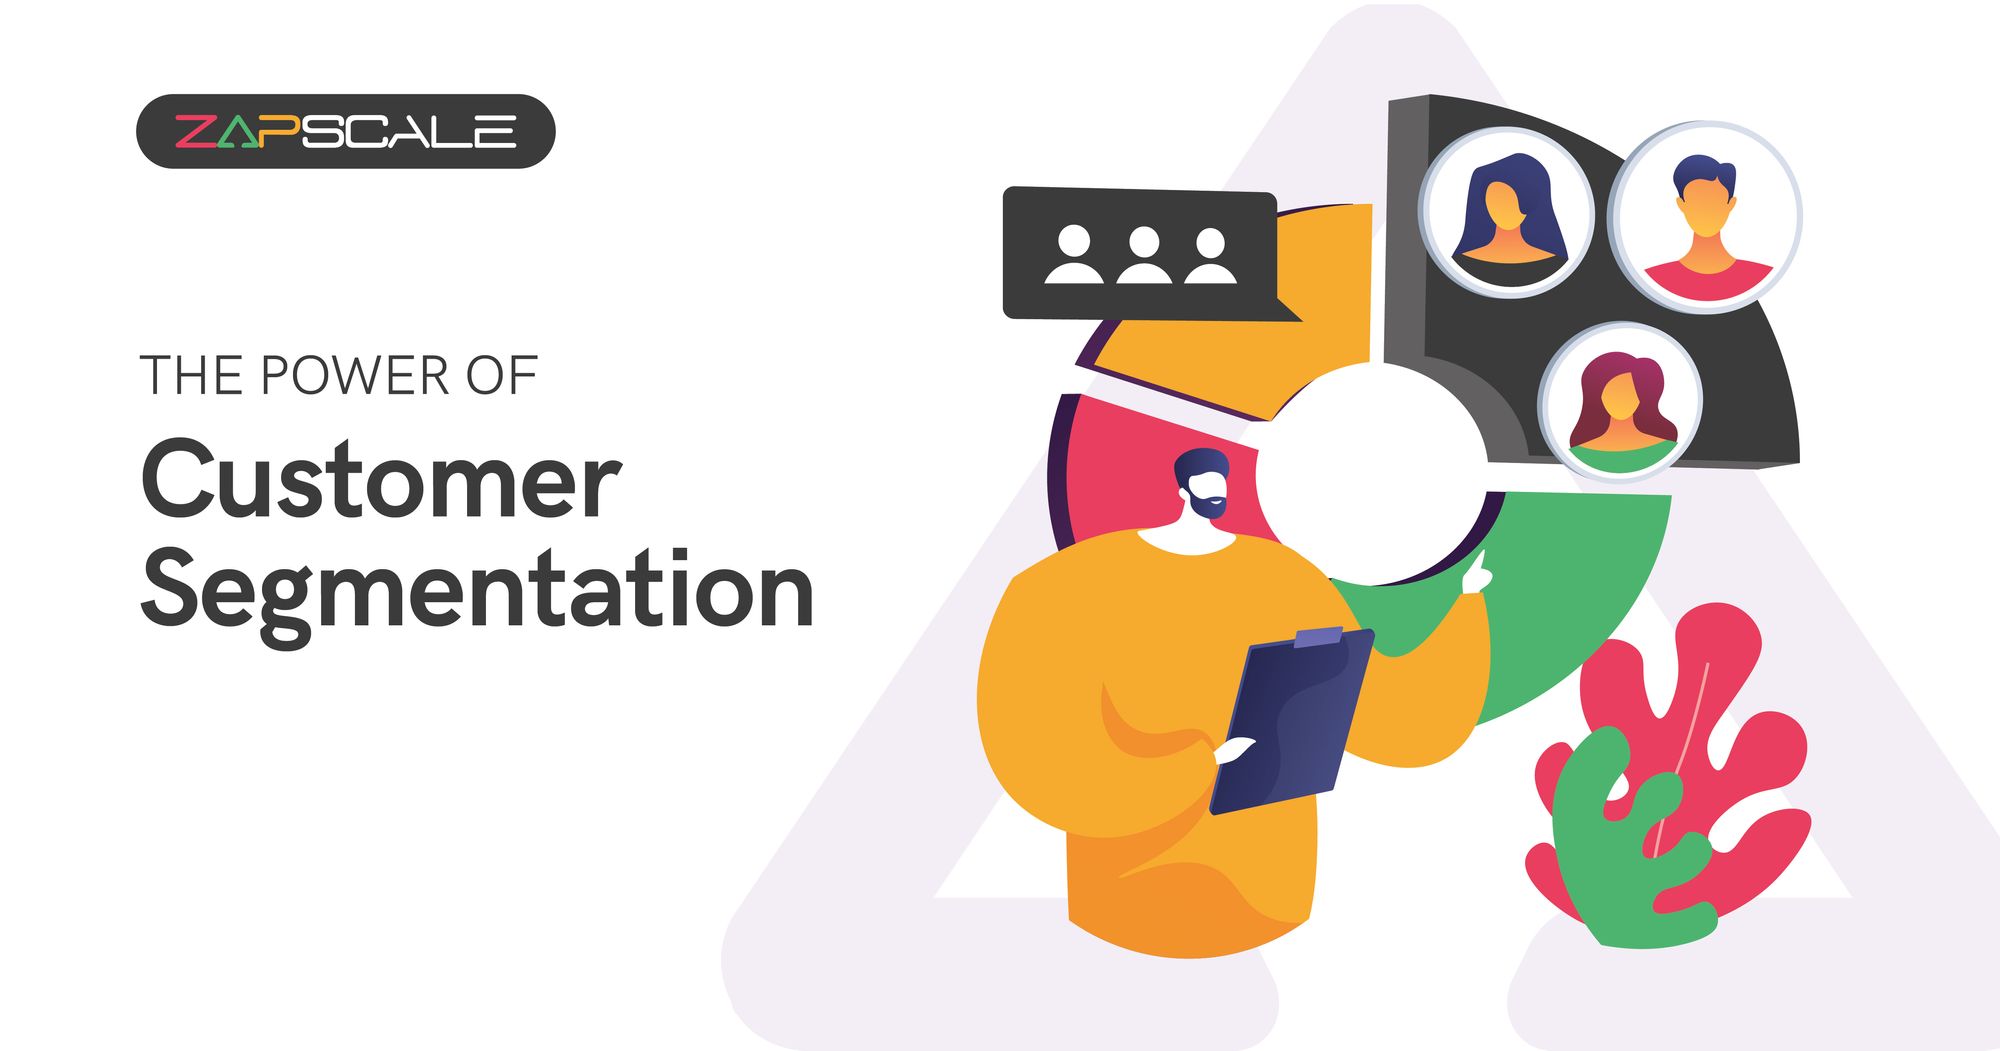 Why is Customer Segmentation crucial for SaaS businesses?